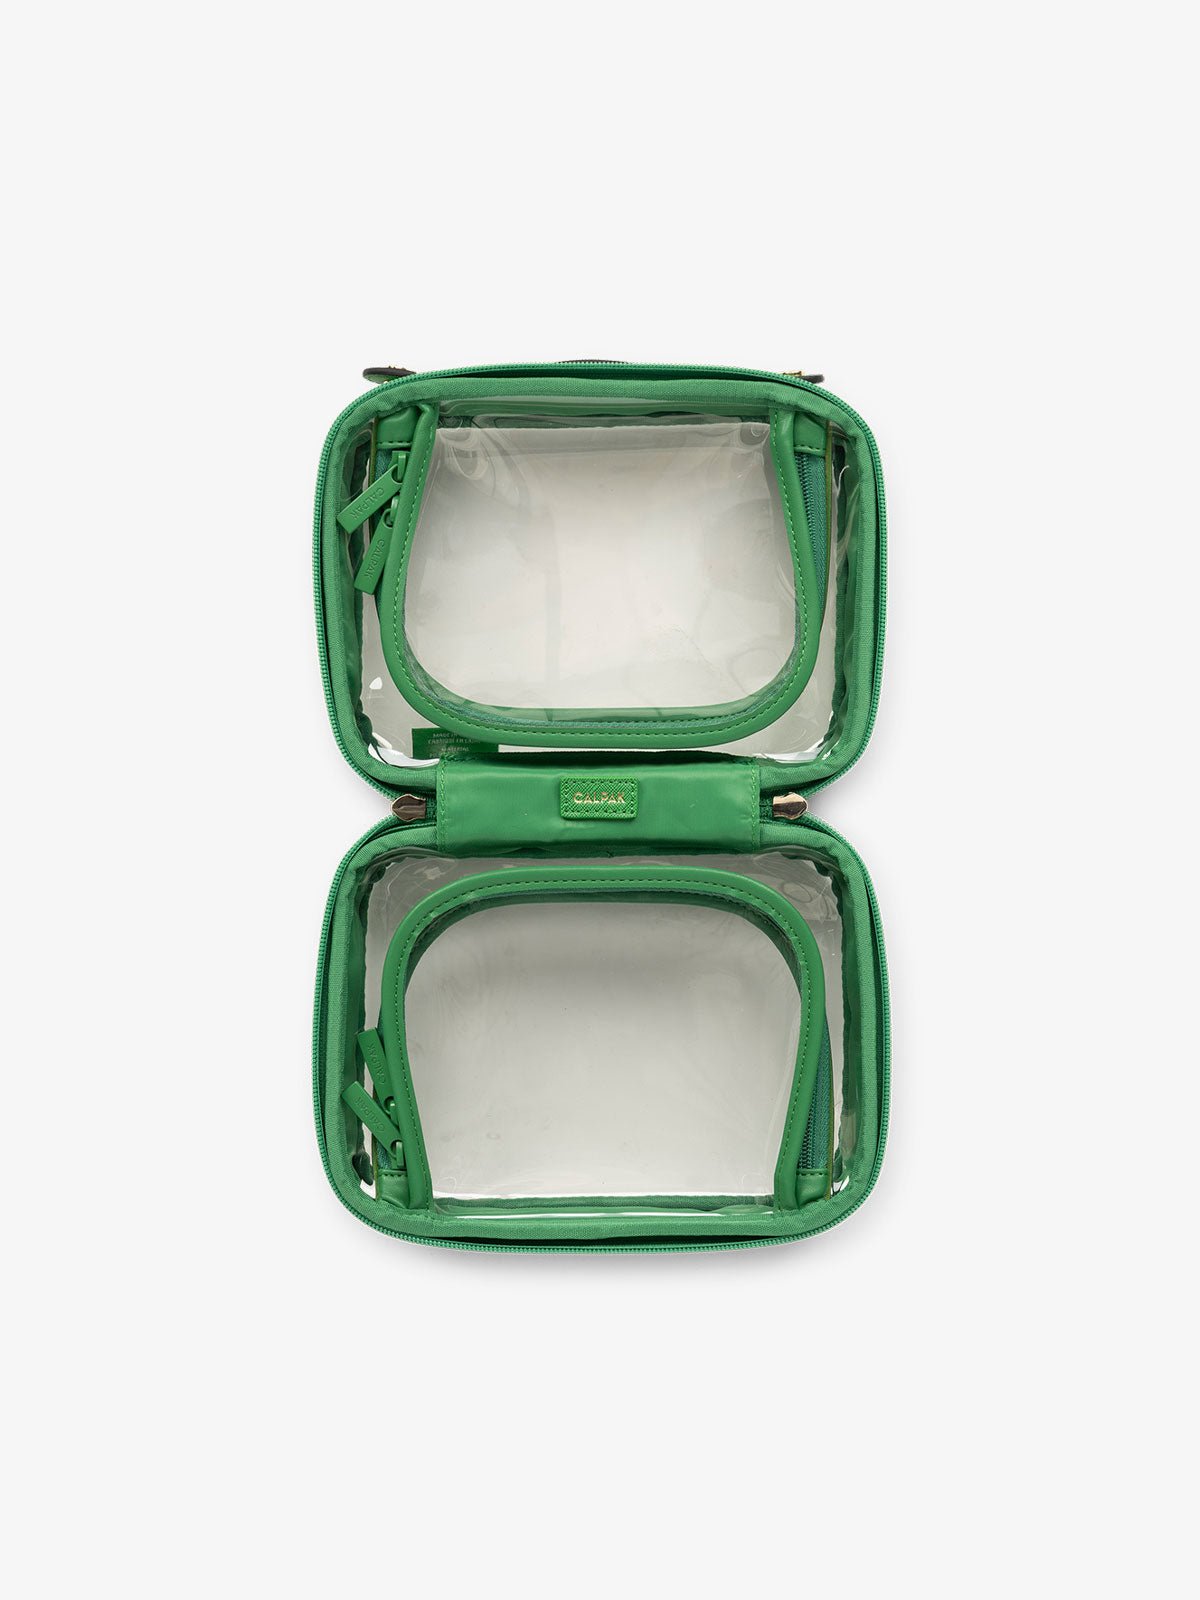 CALPAK small clear skincare bag with multiple zippered compartments in green apple